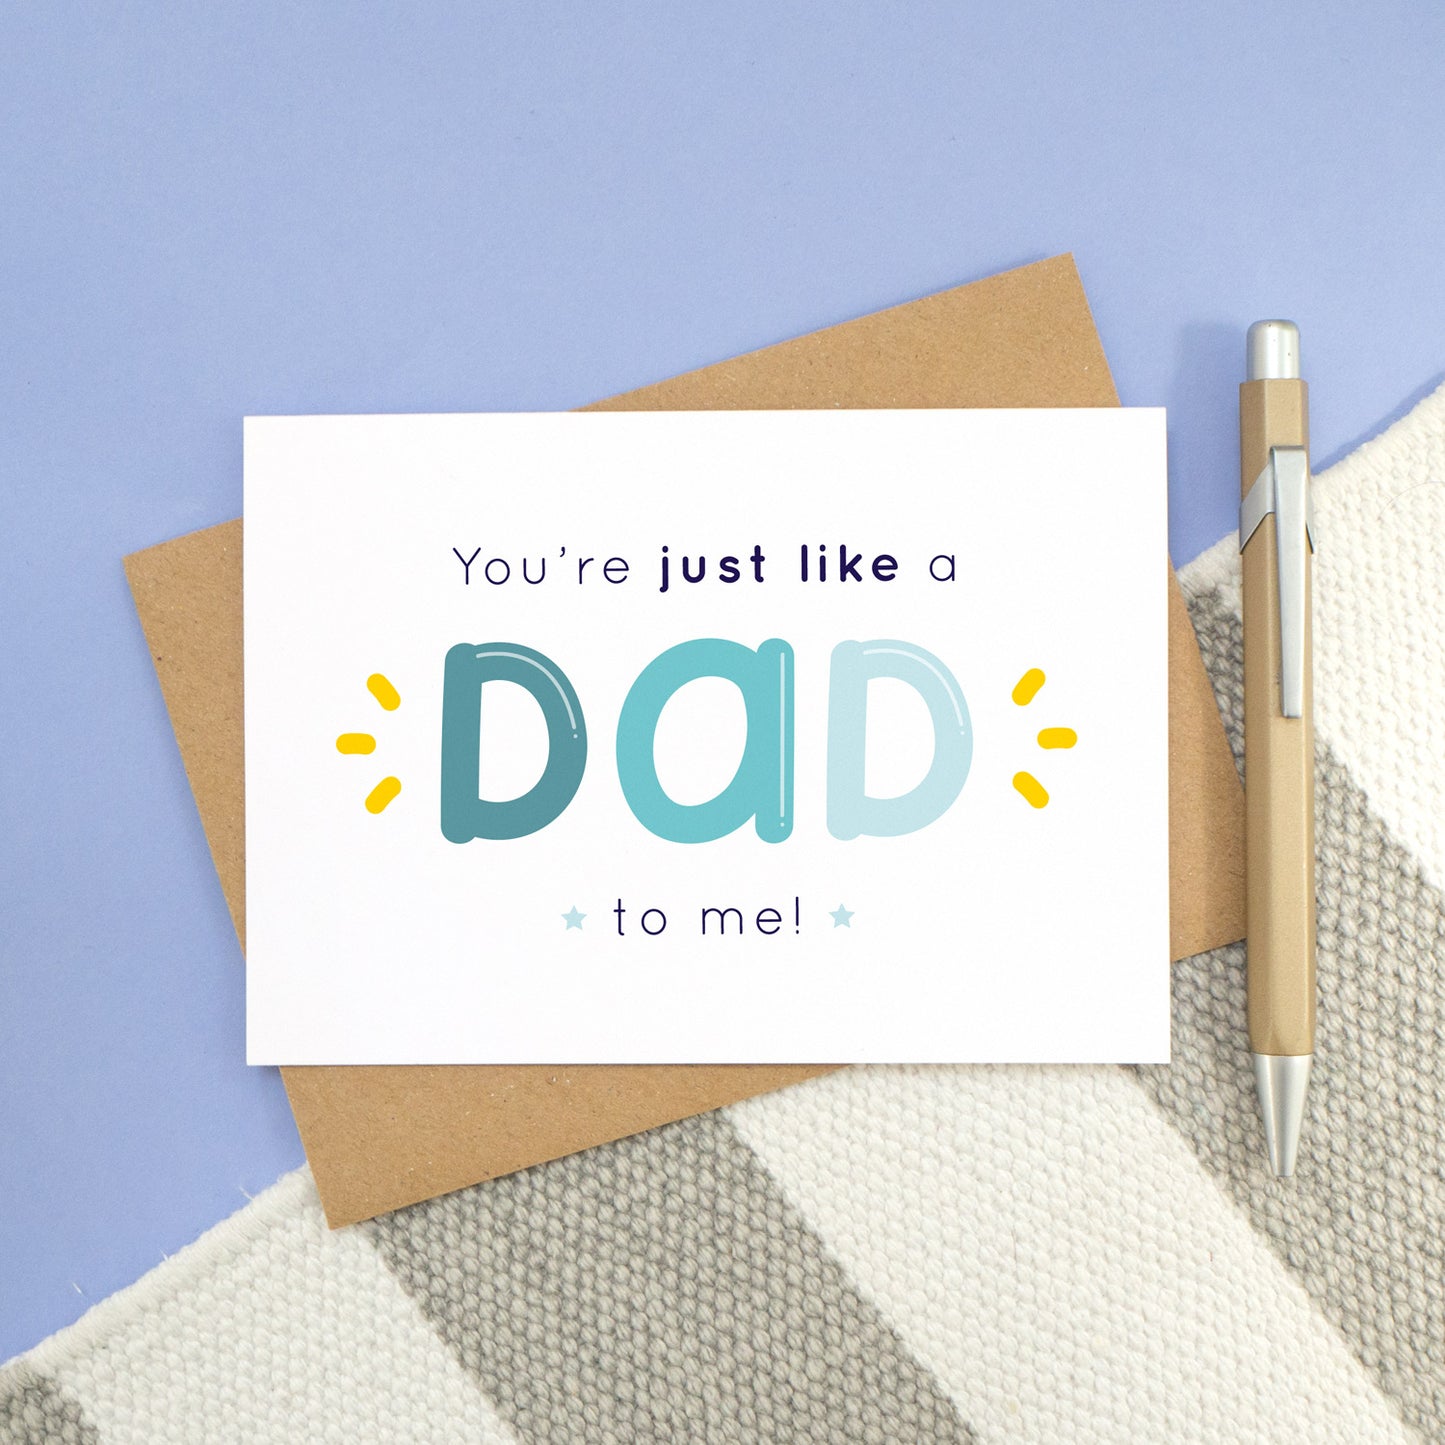 A 'like a dad to me' card shot on top of a kraft envelope and stripy rug with a blue background with a pen. The card shows the text 'you're just like a dad to me!' in varying tones of blue and navy with yellow flicks.